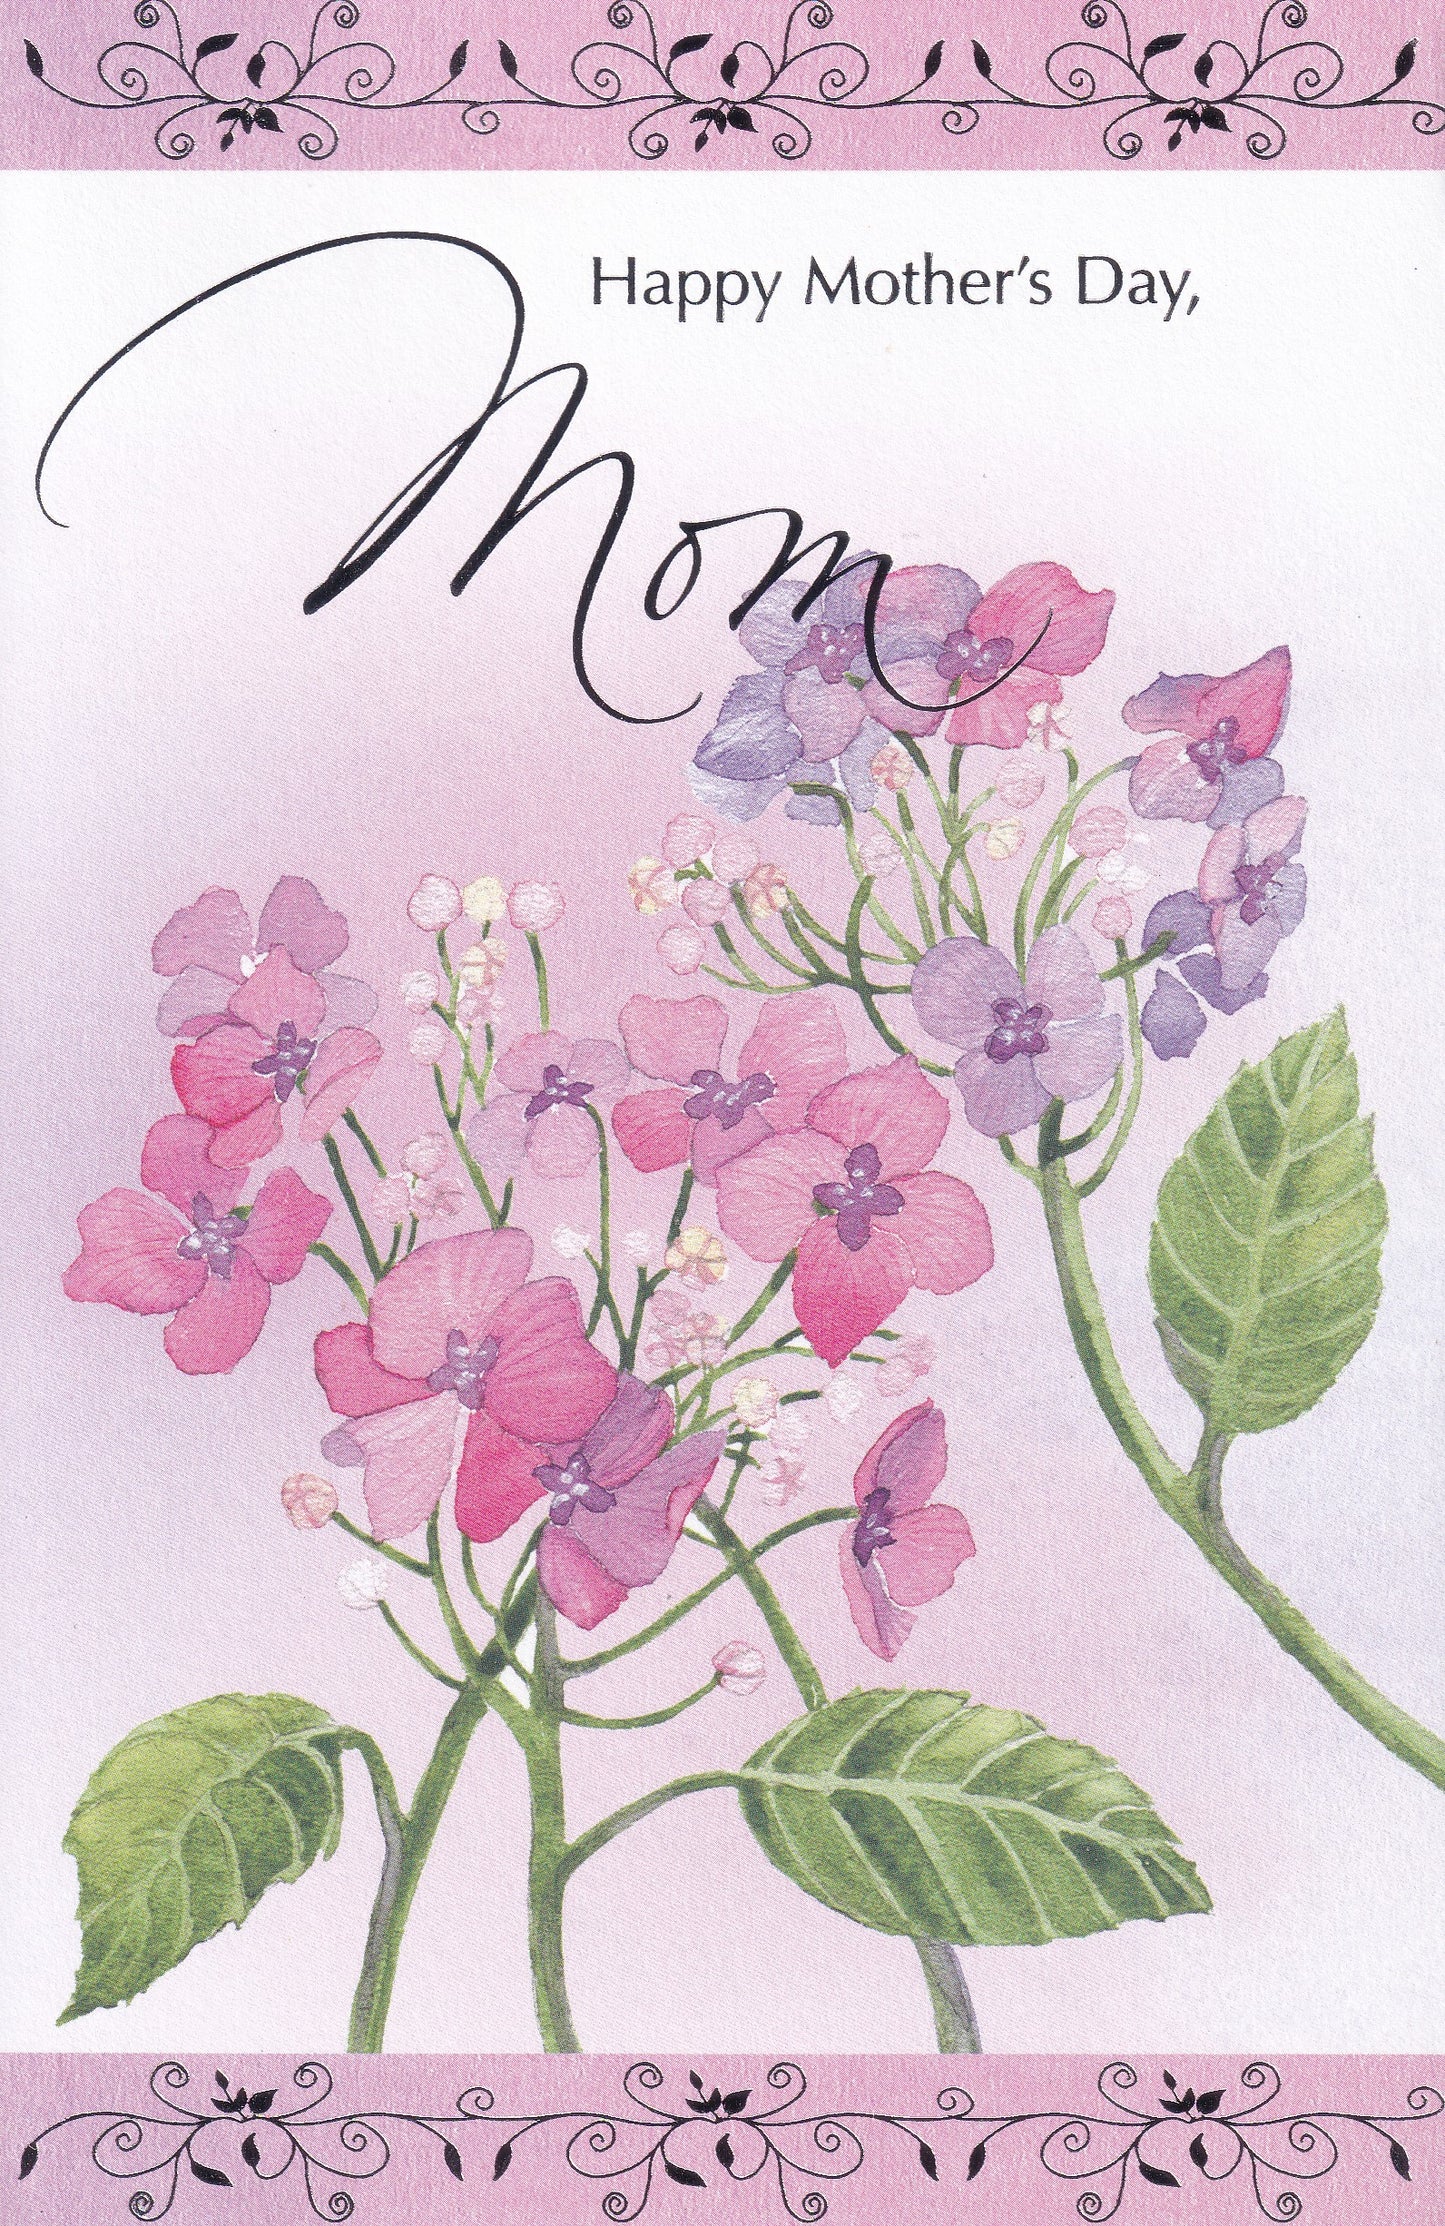 Happy Mother's Day Mom Card